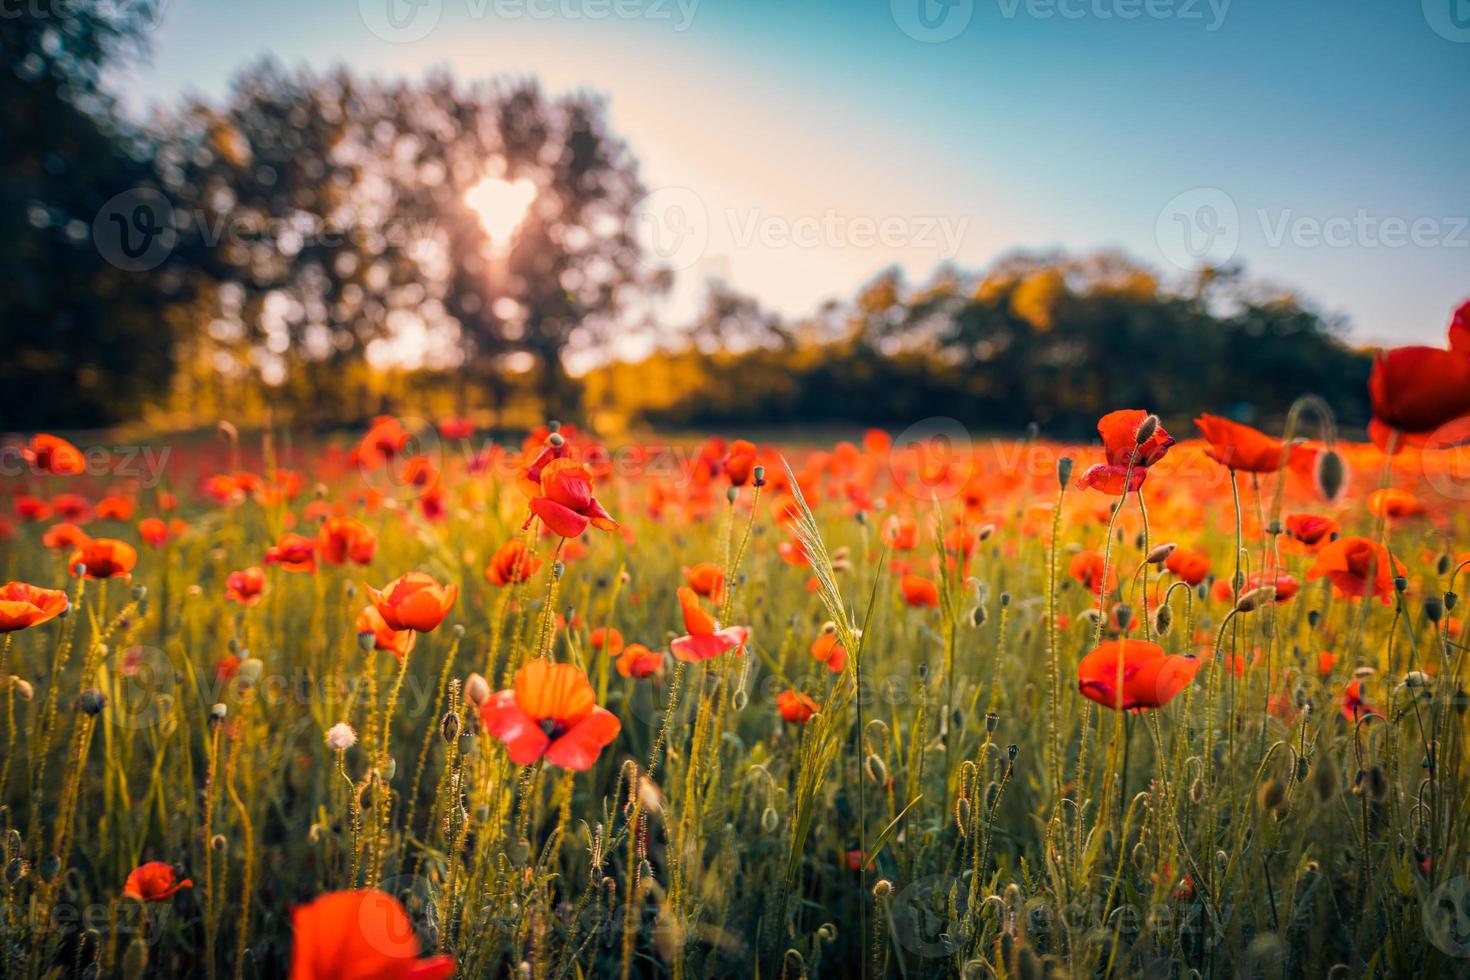 Wonderful landscape at sunset. Meadow field blooming red poppies. Wild flowers in springtime forest field. Amazing natural landscape in summertime. Peaceful nature sunny view on blurred bokeh light photo